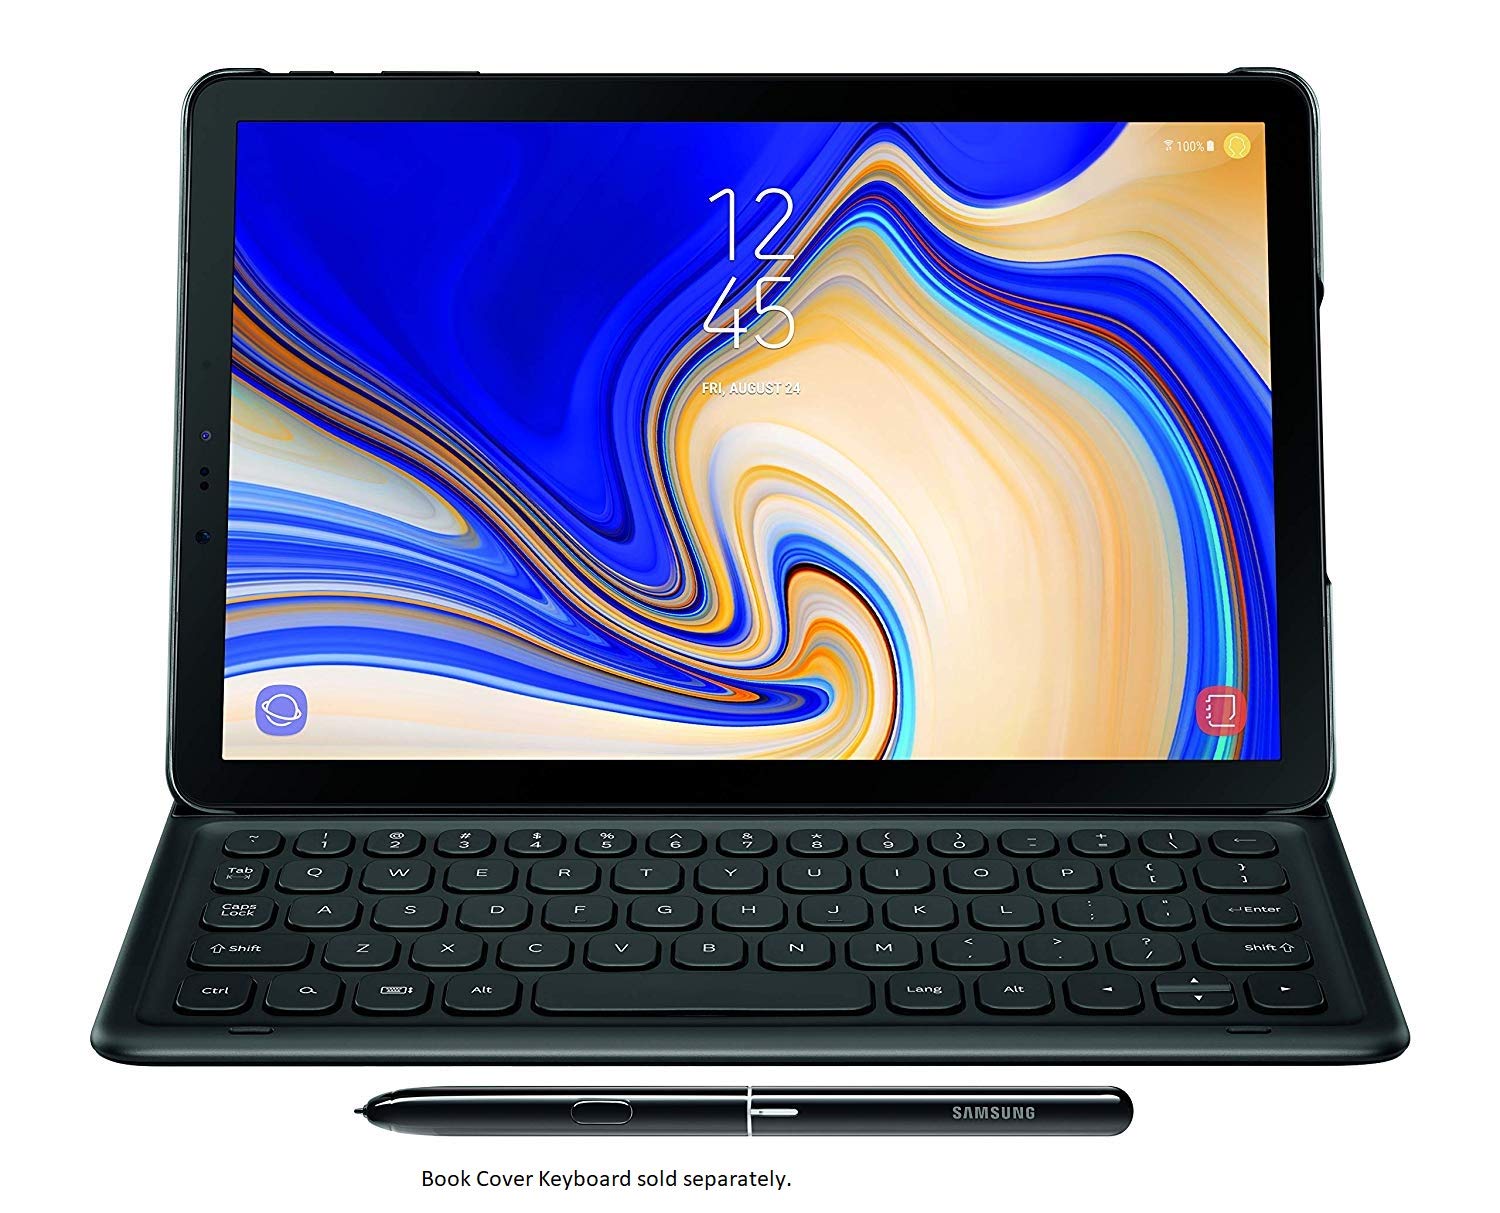 Samsung Electronics SM-T830NZKAXAR Galaxy Tab S4 with S Pen, 10.5